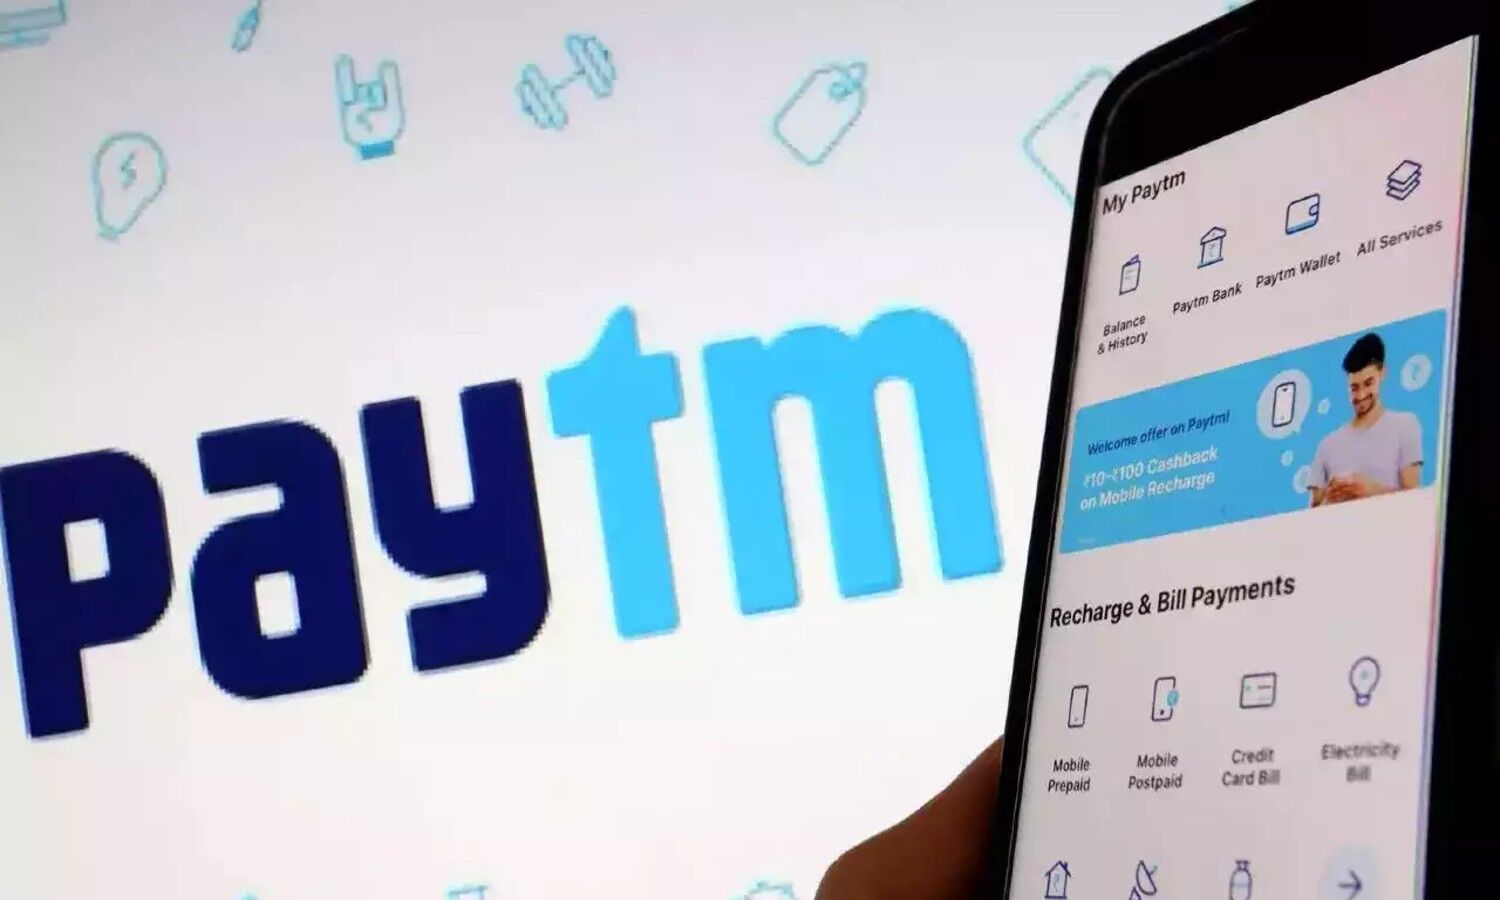 Paytm UPI: Link your bank account on Paytm with these easy steps, money transactions will happen instantly